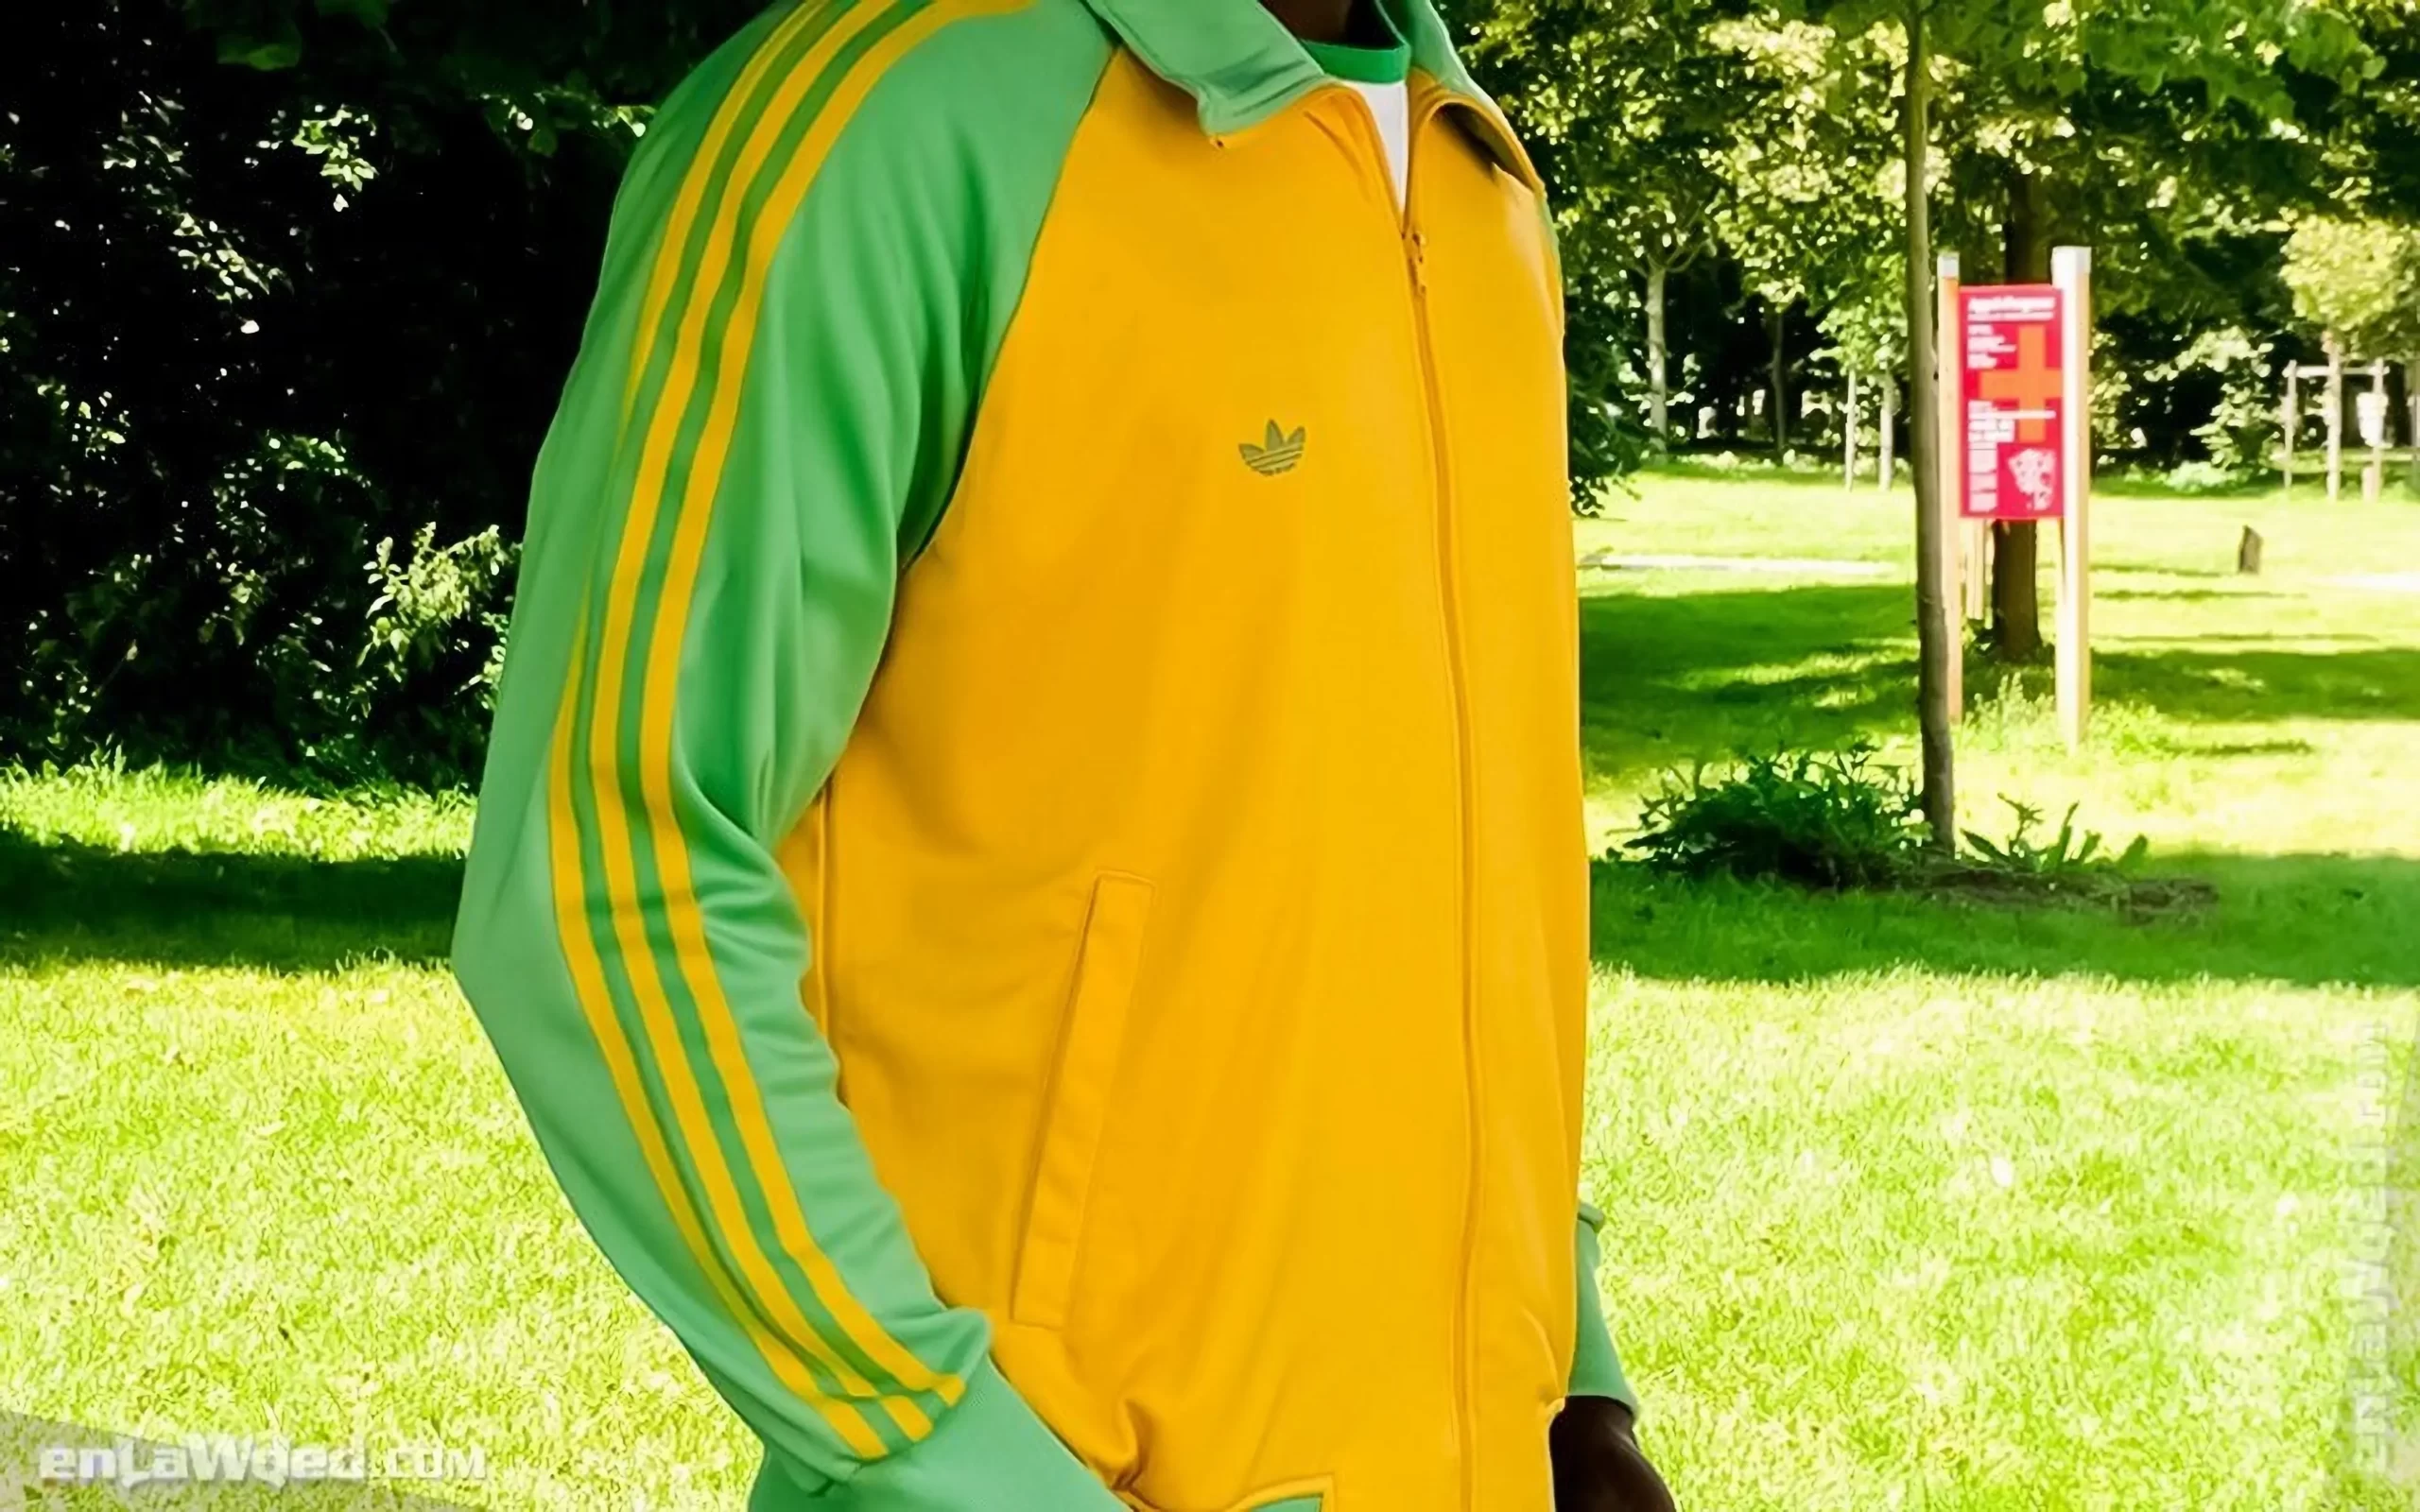 Men’s 2003 Zimbabwe Track Top by Adidas: Indulgence (EnLawded.com file #lmcgzqv2ky8sn1tvtyq)